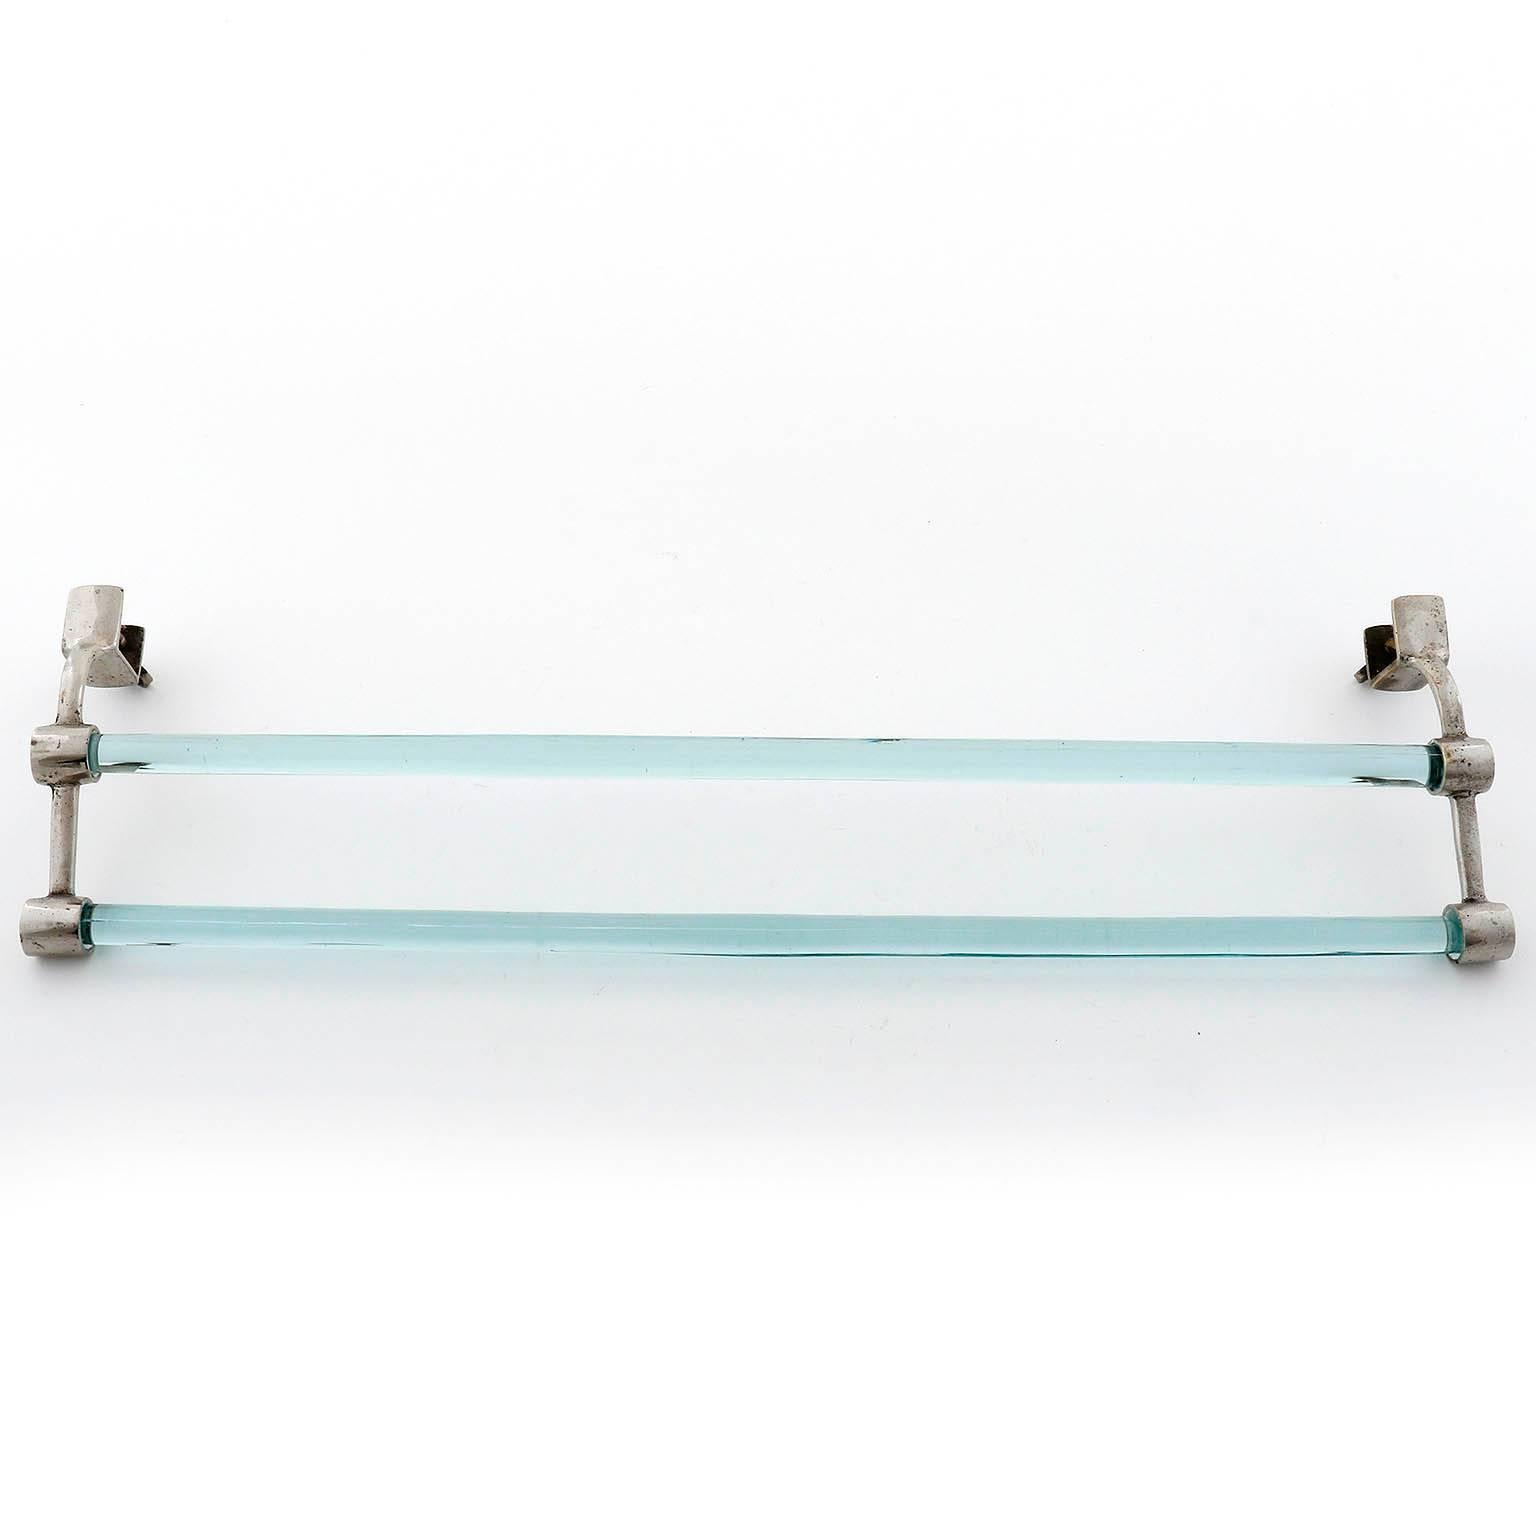 An Art Deco towel holder with two bars made of nickel plated brass and glass rods, manufactured circa 1930.
There are two screws to mount the item on a board or table. Nice patina on nickel.